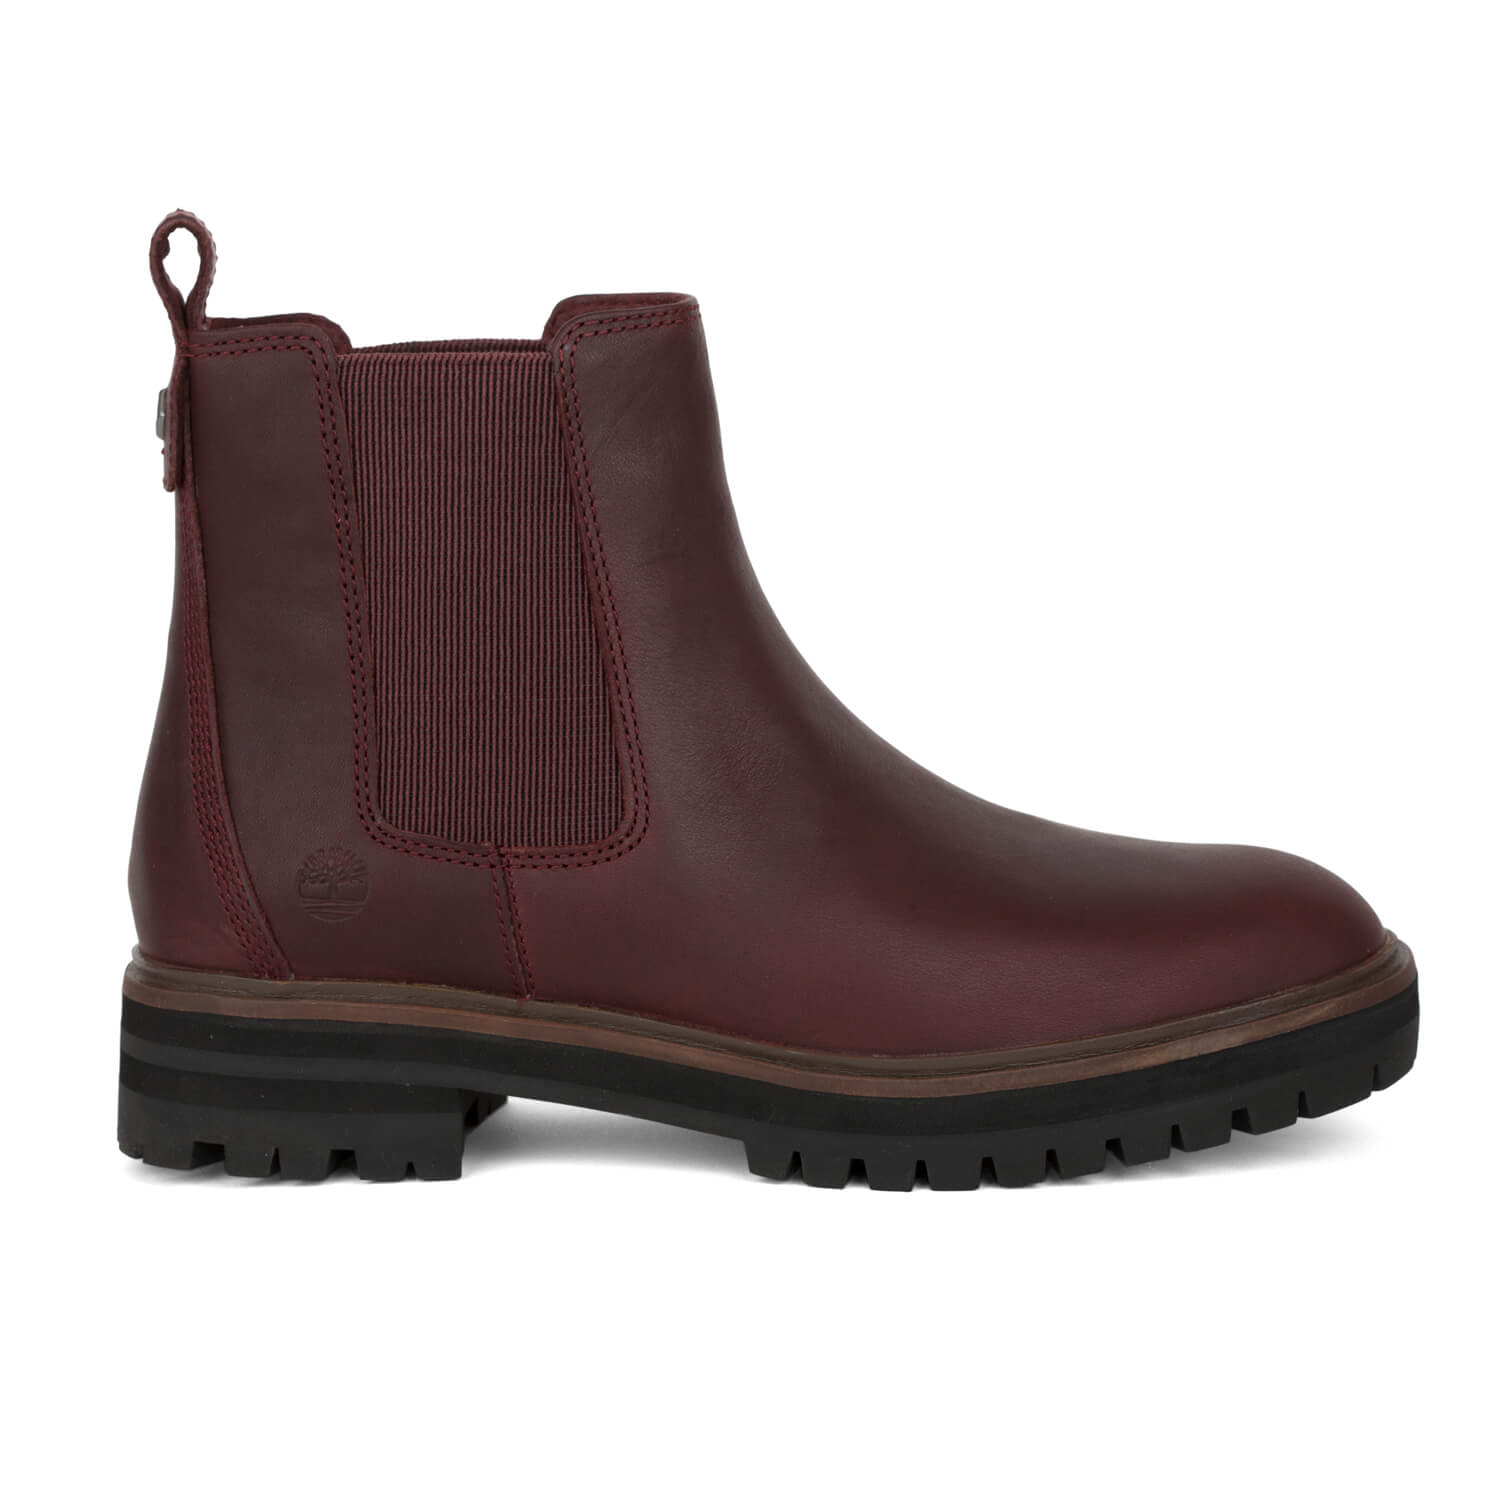 Timberland London Square Boots weinrot Damen Plateau Sohle | DROP-IN.de